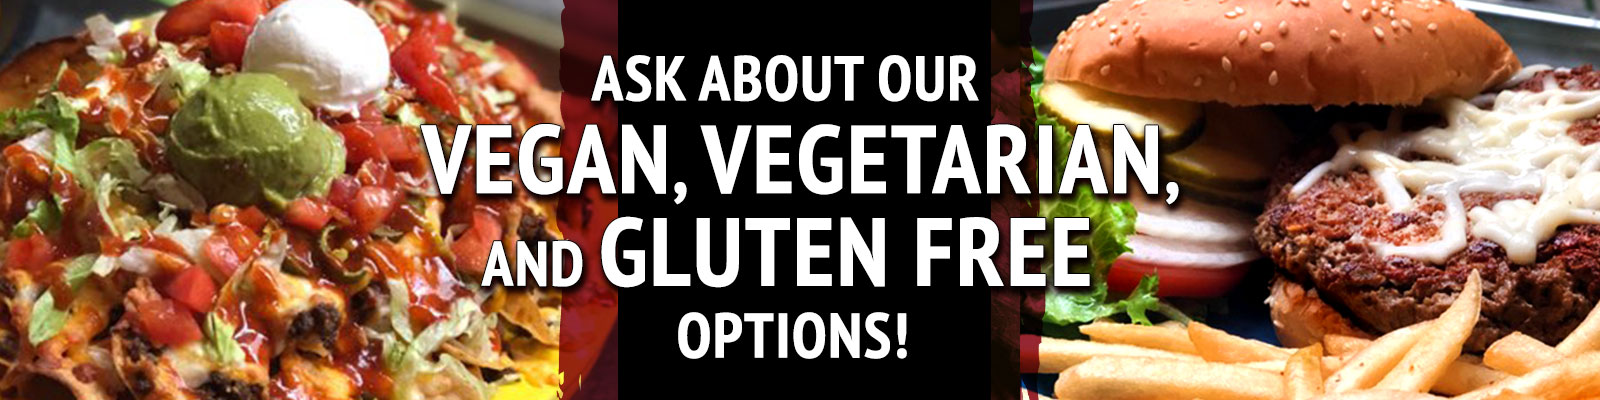 Ask about our Vegan, Vegetarian, and Gluten Free options!